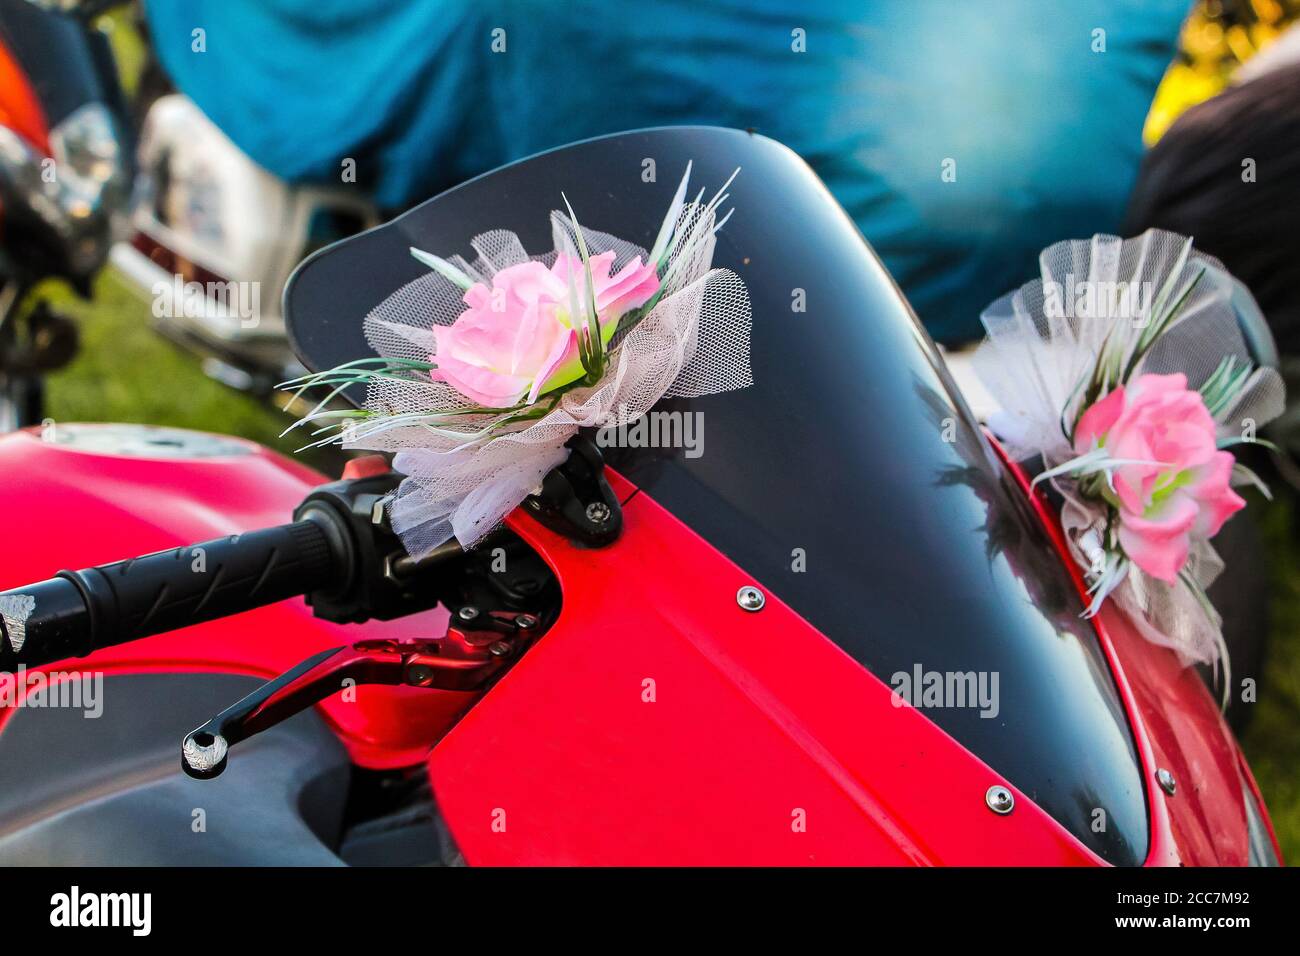 Red motorcycle with festive bows on the steering wheel. Moto decoration for wedding Stock Photo